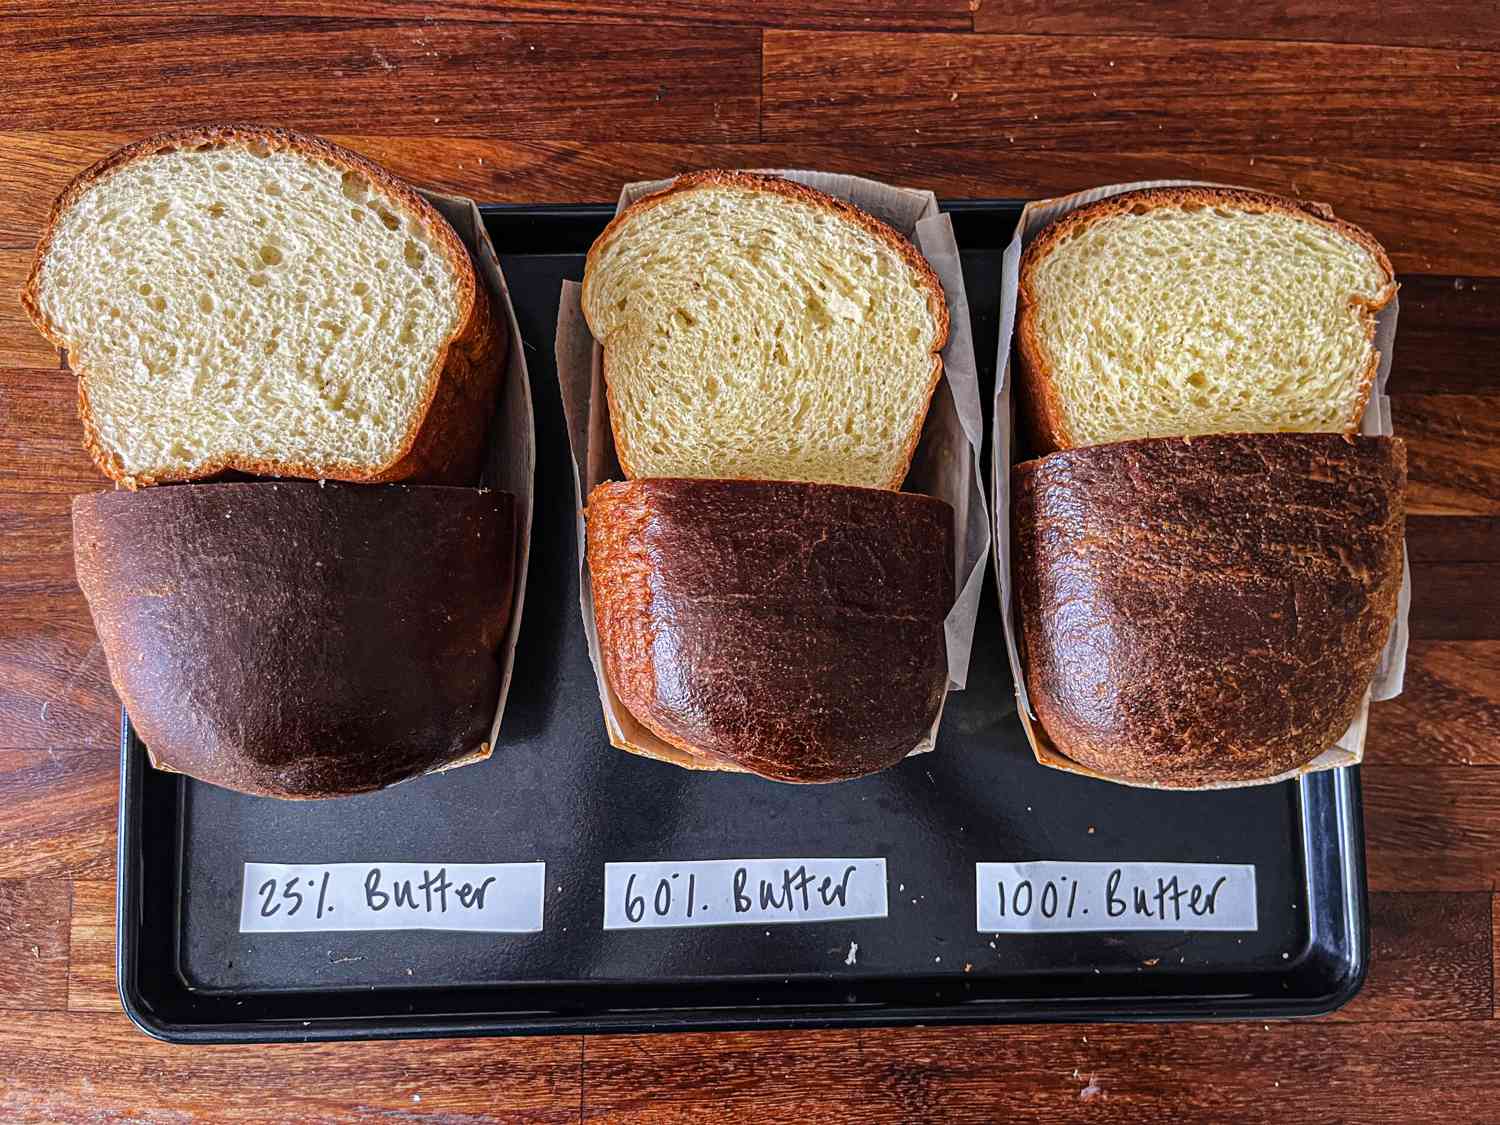 Three brioche loaves cut in half to show the difference between percentage of butter (25%, 60%, 100%)